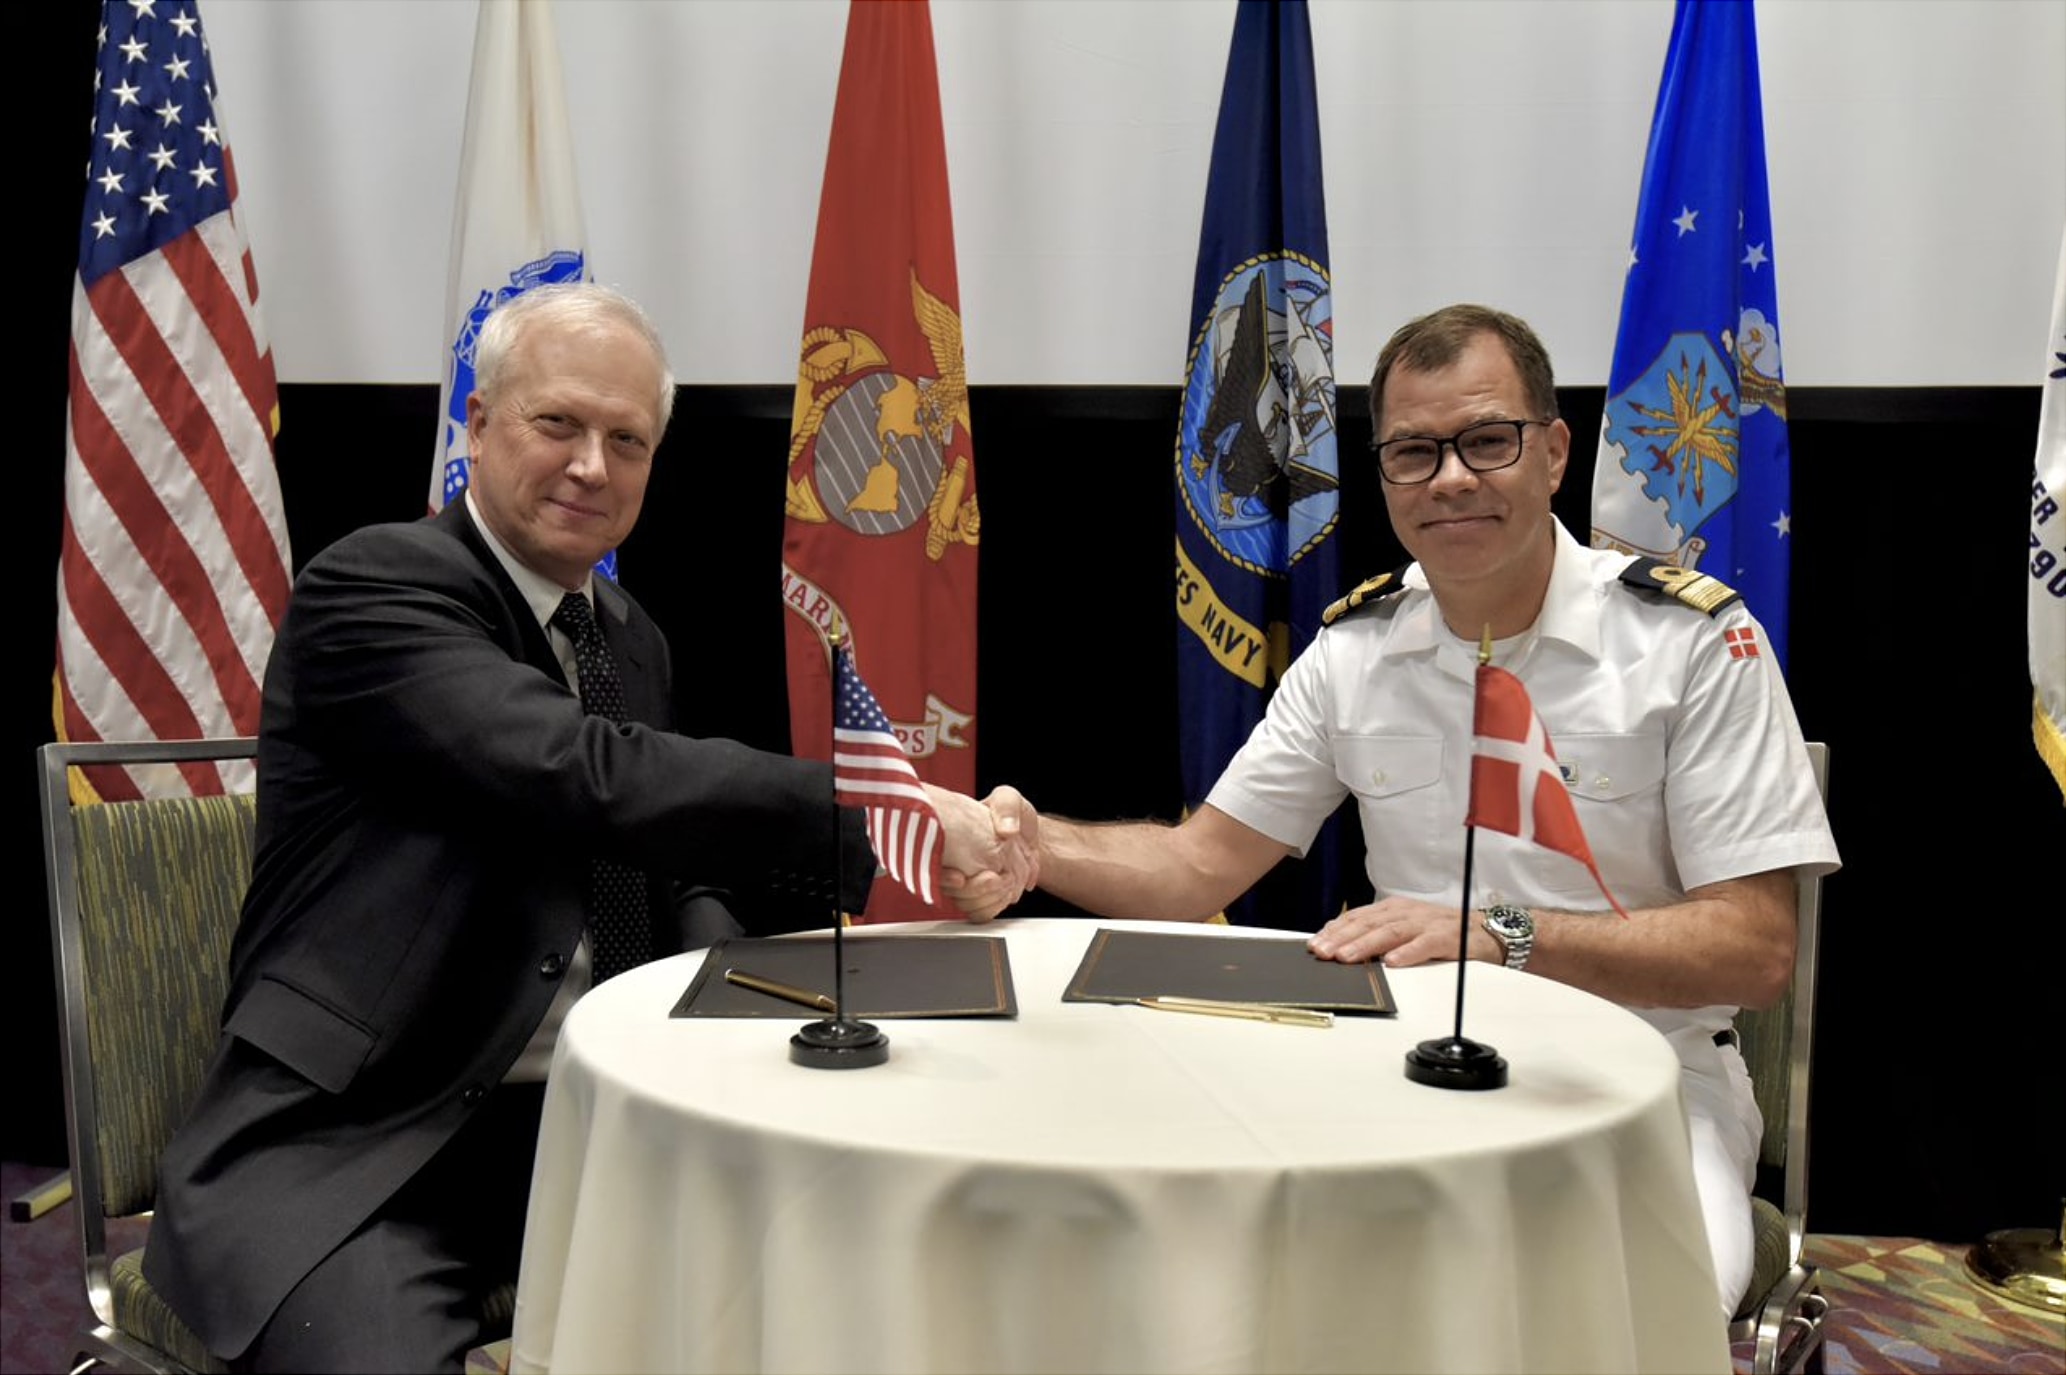 Mr. Drummond (left) and Admiral Ryberg (right) bring Denmark into the ADL Global Partnership